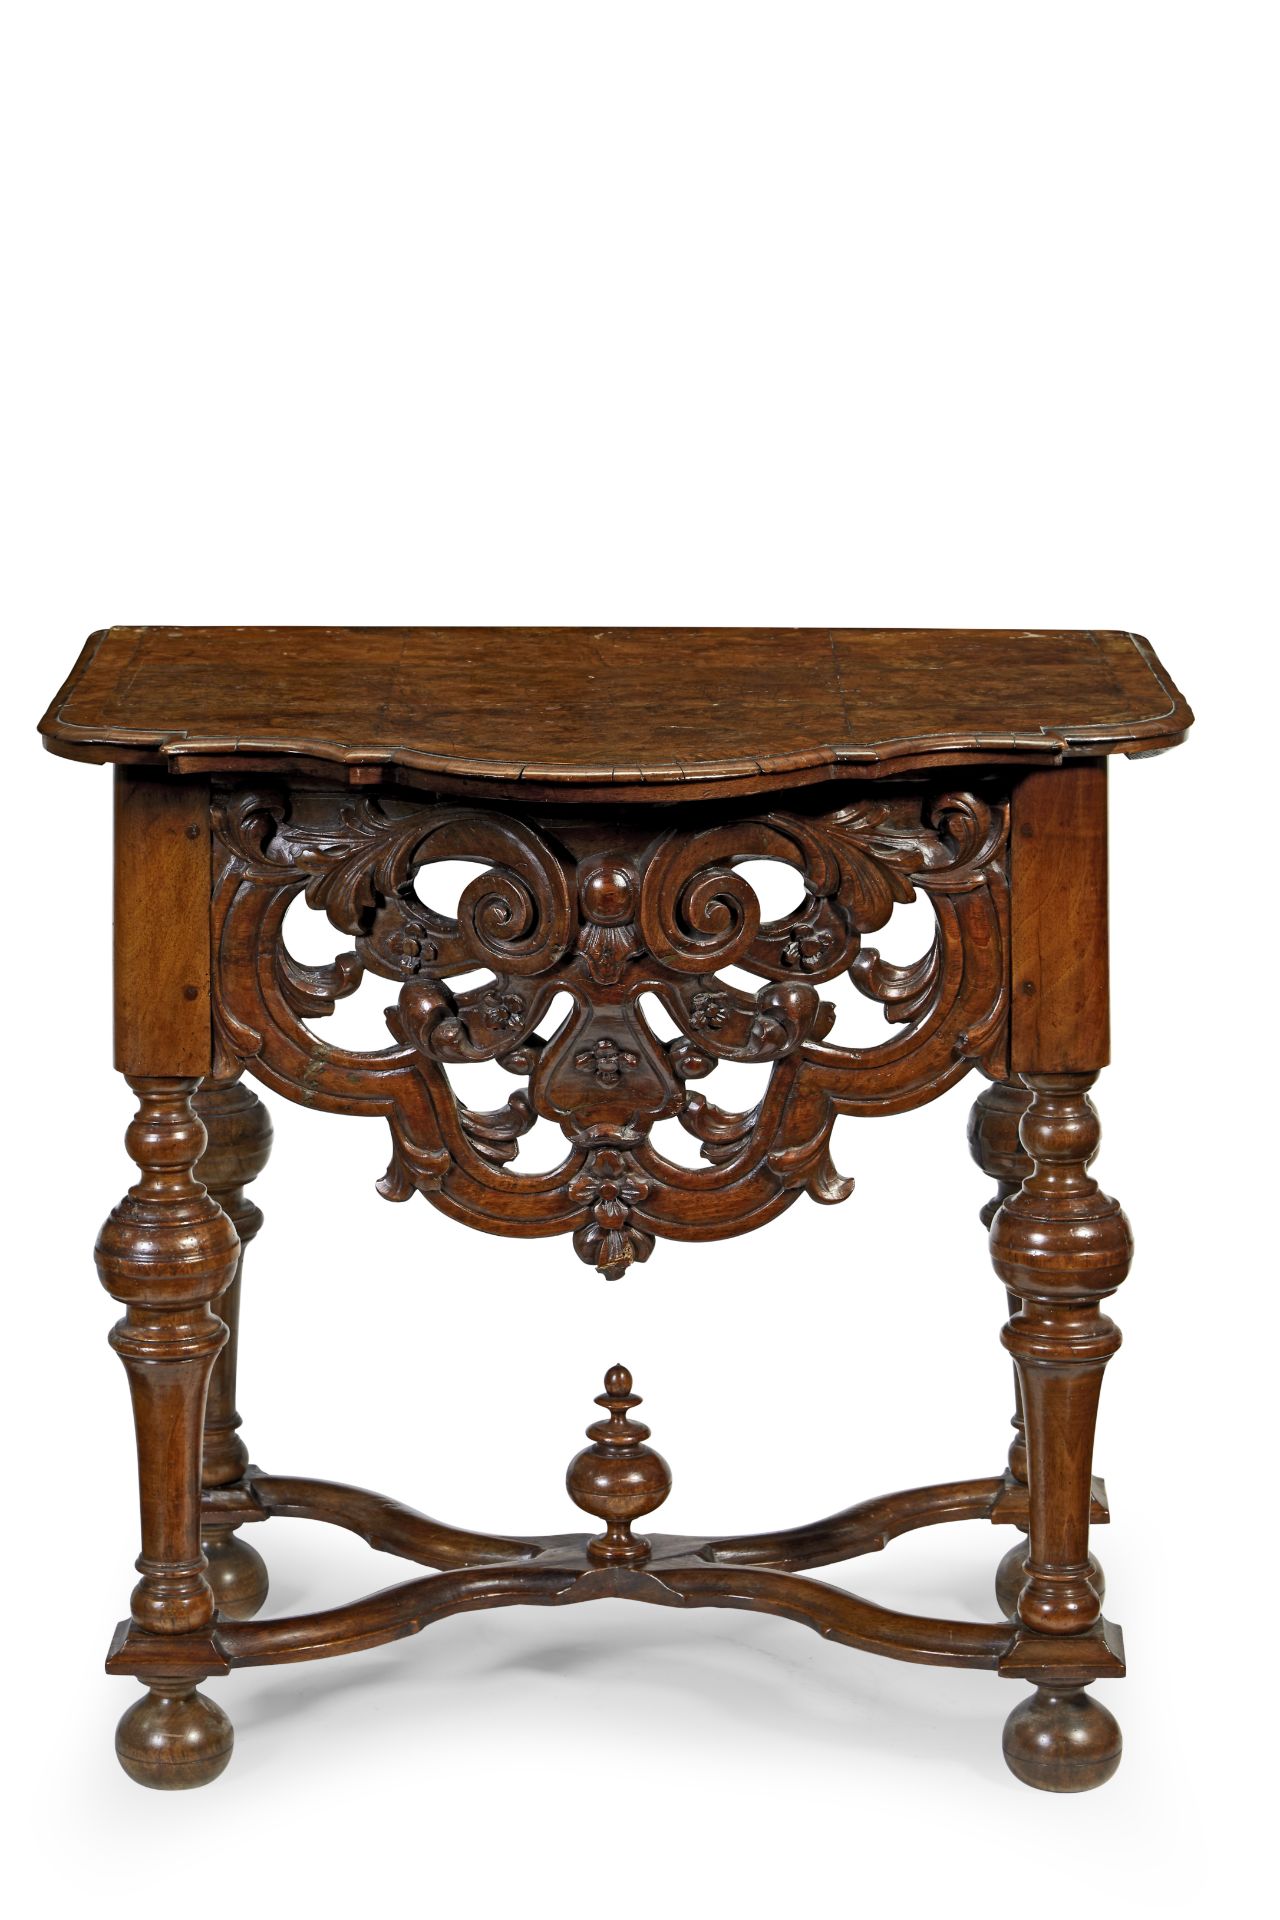 A Dutch walnut and burr walnut side table or cabinet standLate 17th century and later